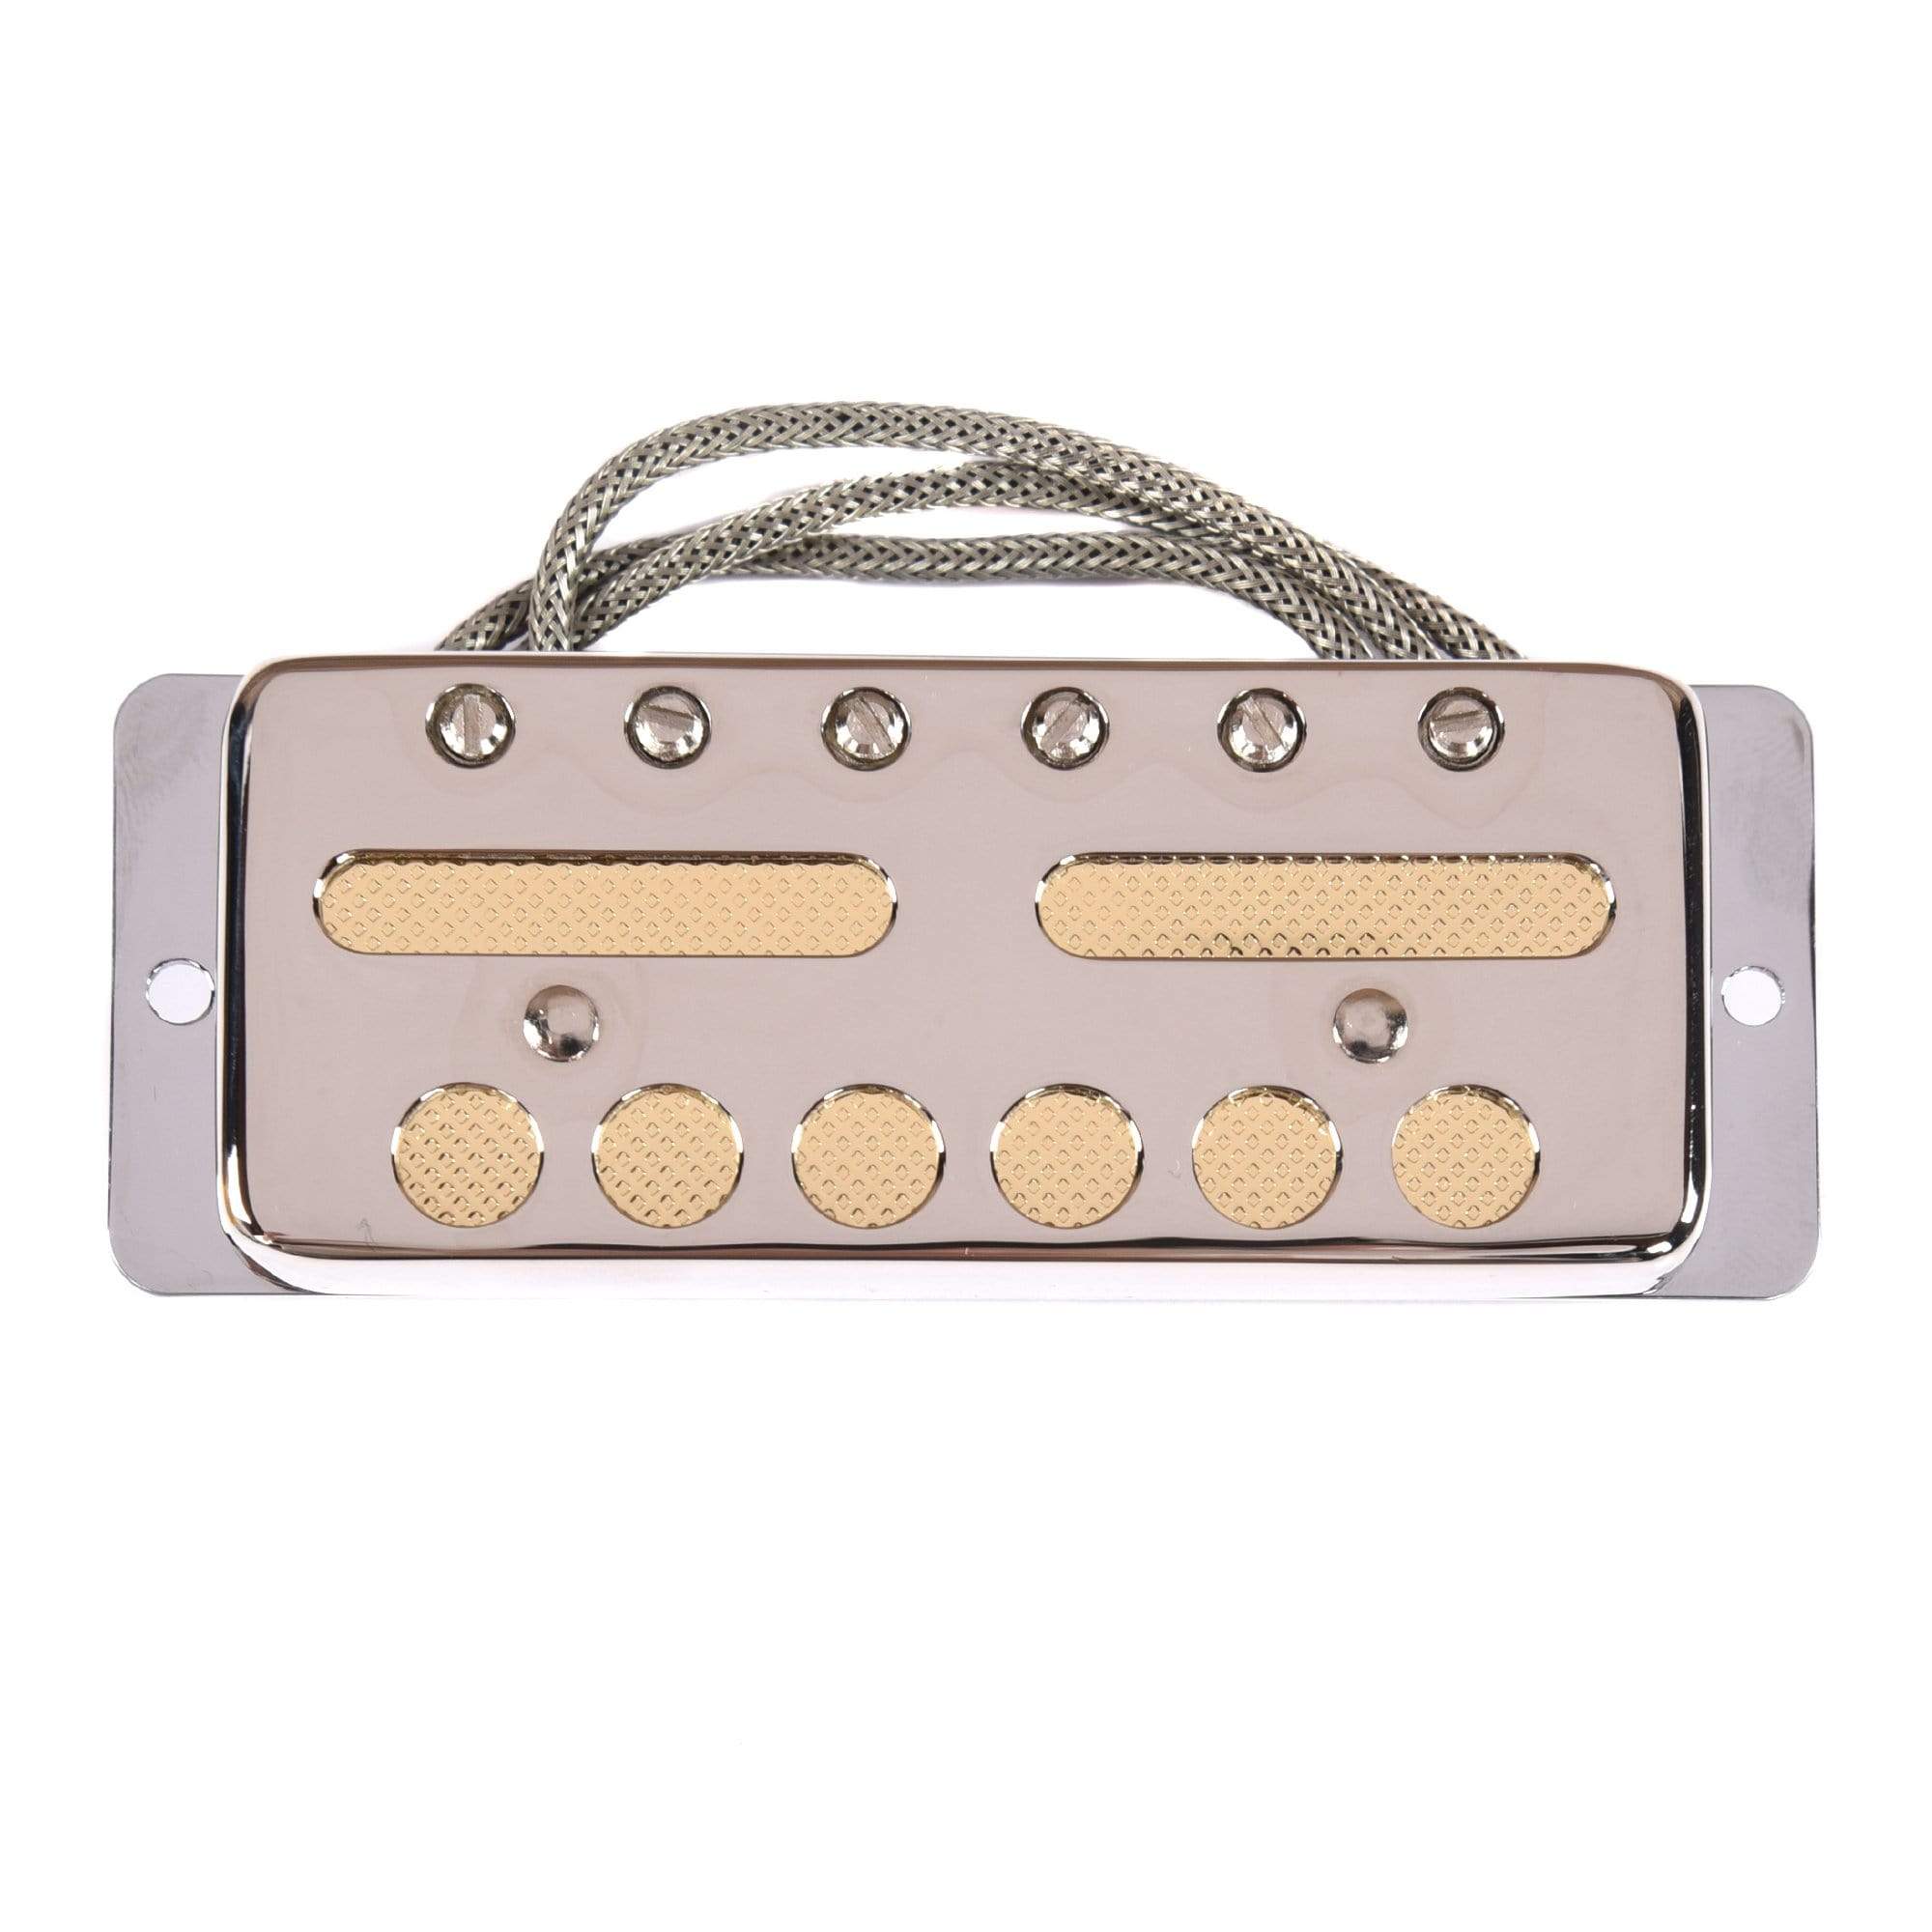 Lollar Gold Foil Teisco-style Single Coil Pickup Neck Nickel